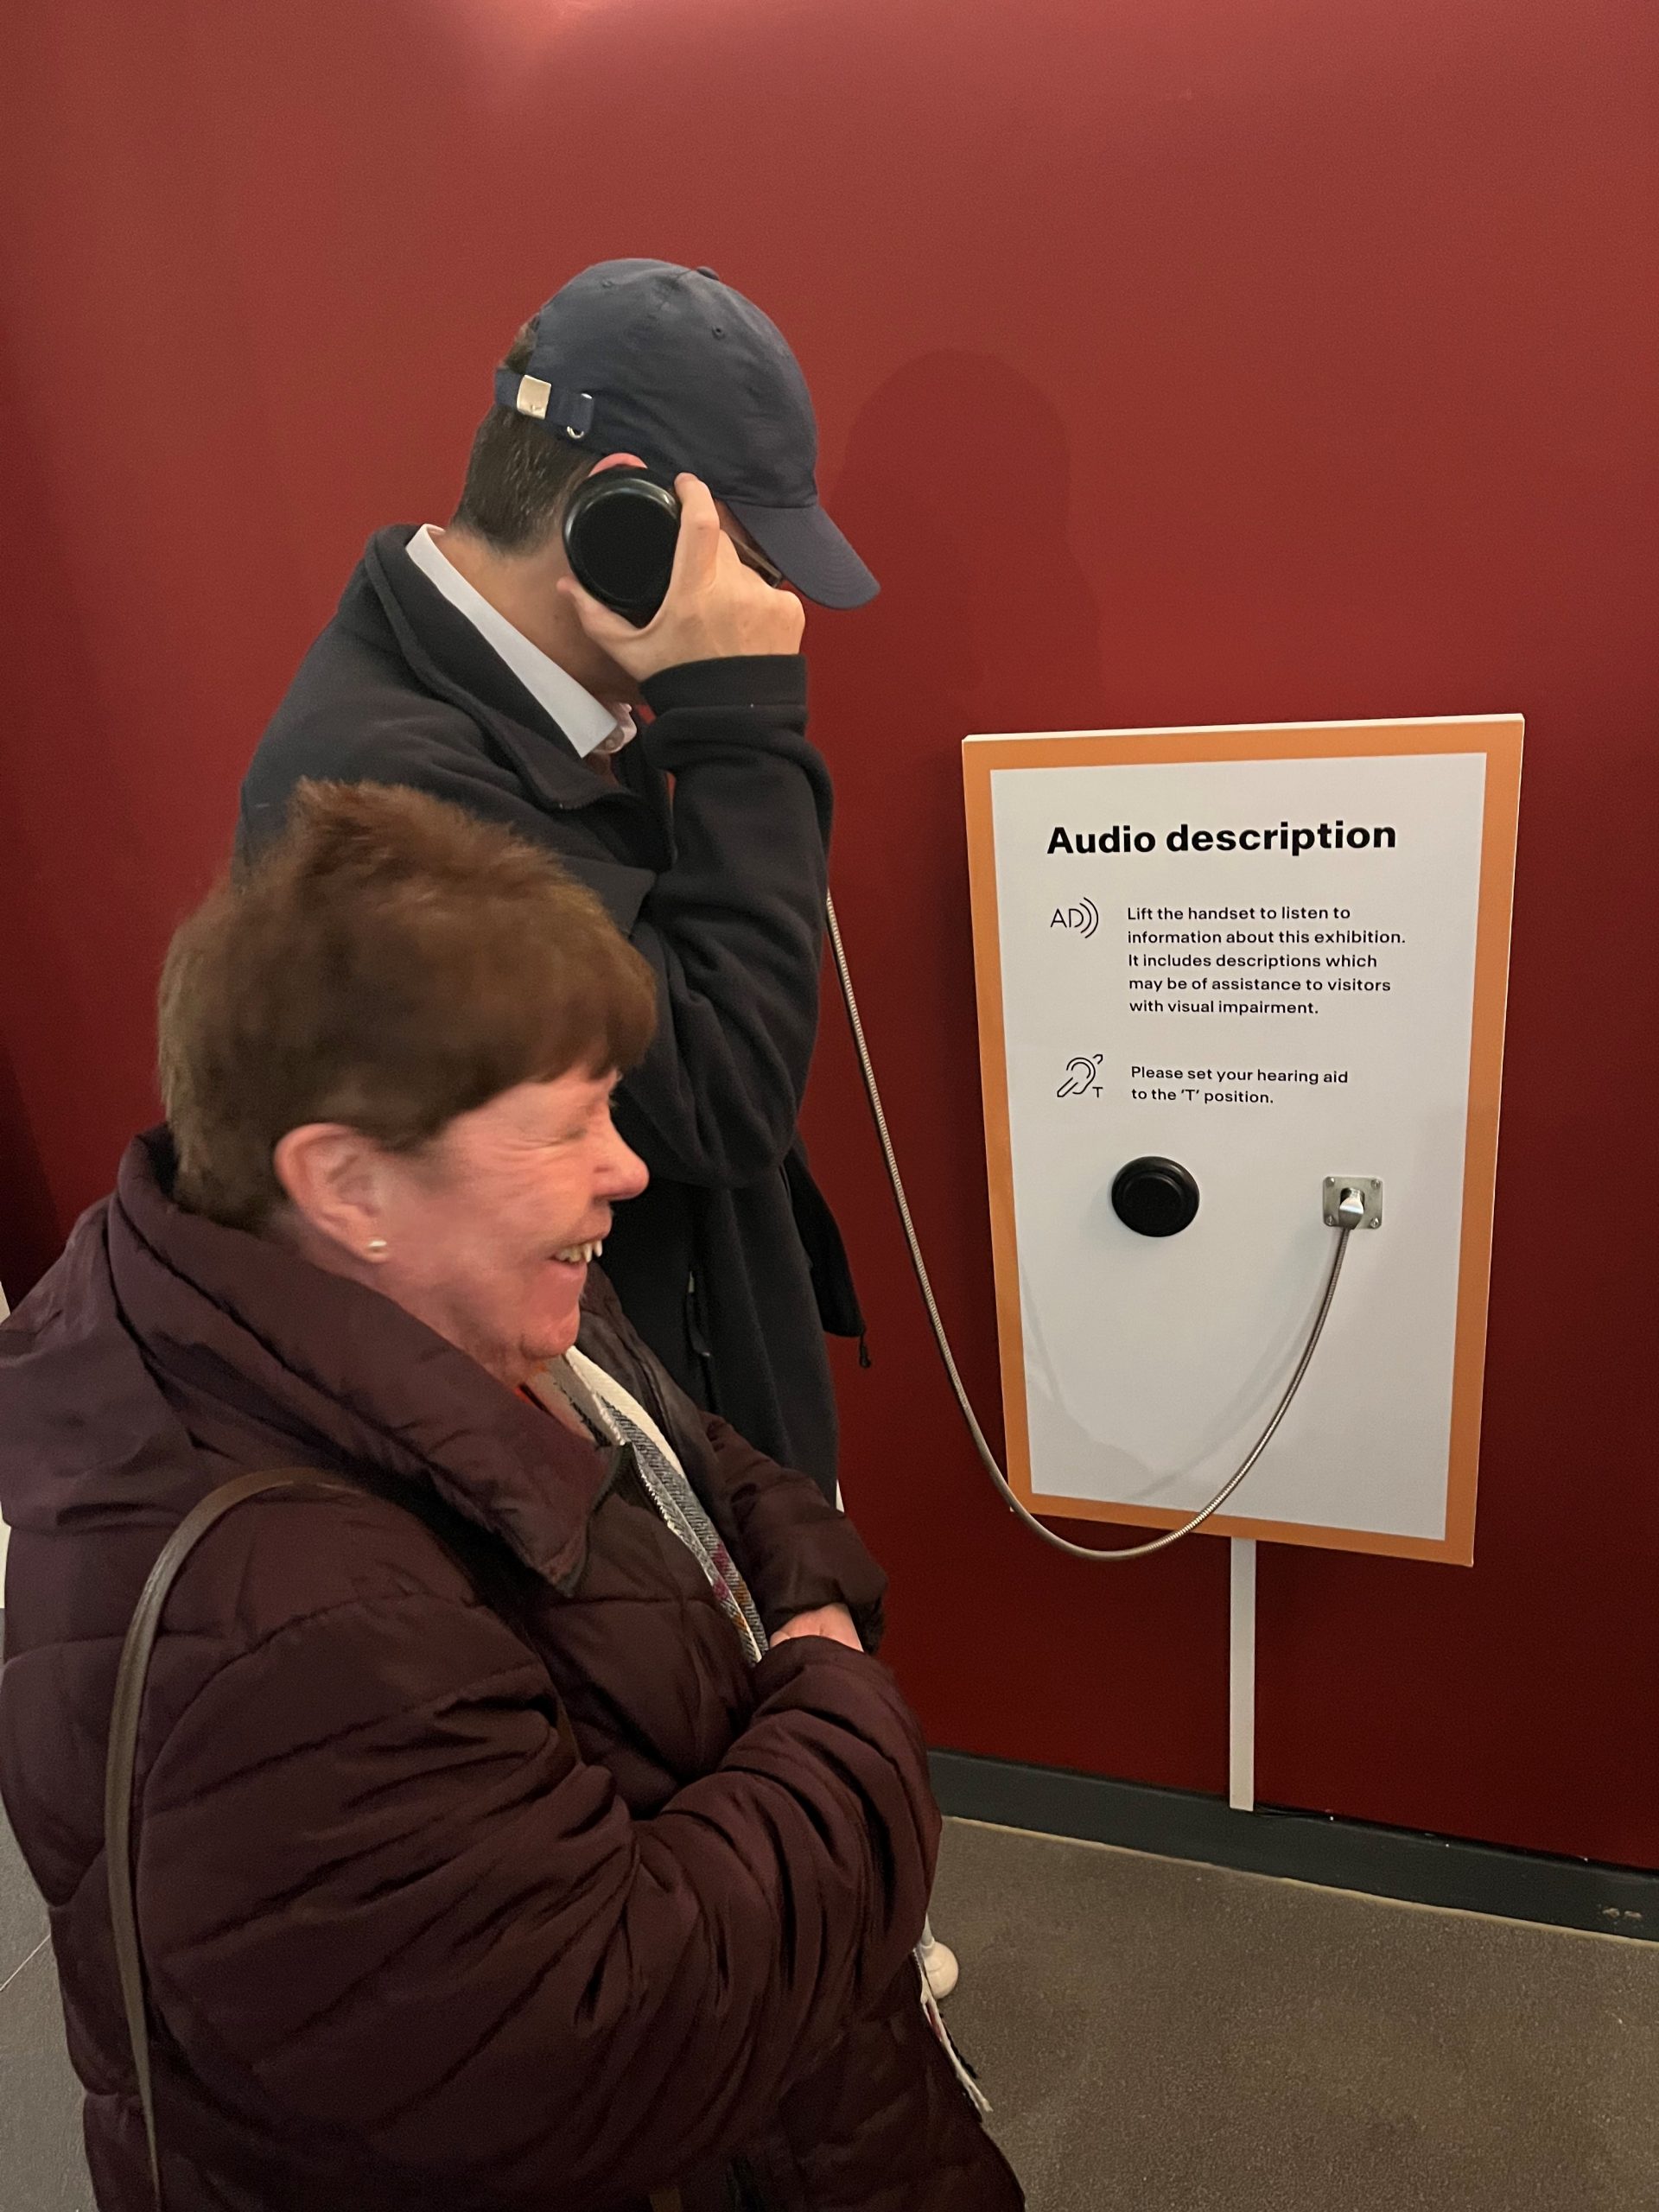 Two delegates pictured using audio description during the Happiness tour. A gentleman is holding a headphone up to his ear whilst a female attendee looks on, smiling.